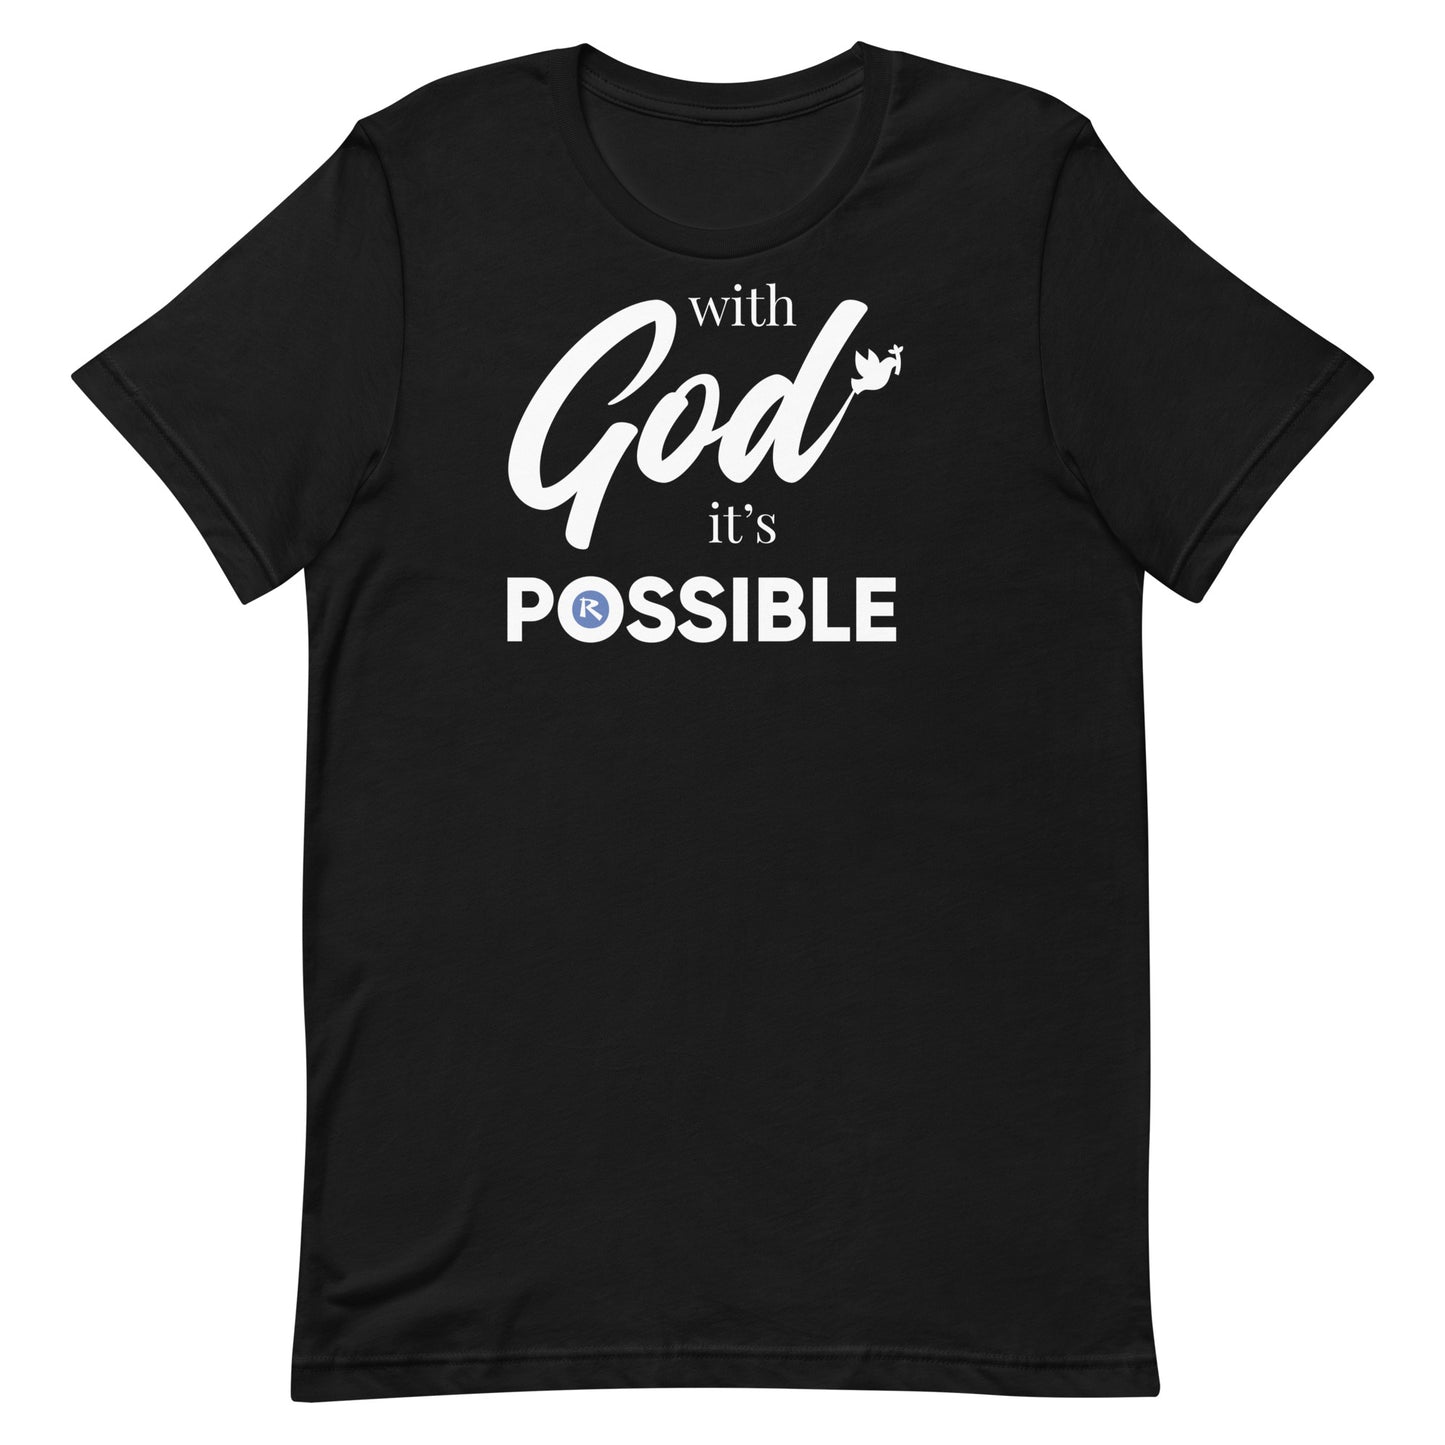 With God, It's POSSIBLE T-Shirt (Unisex Fit)